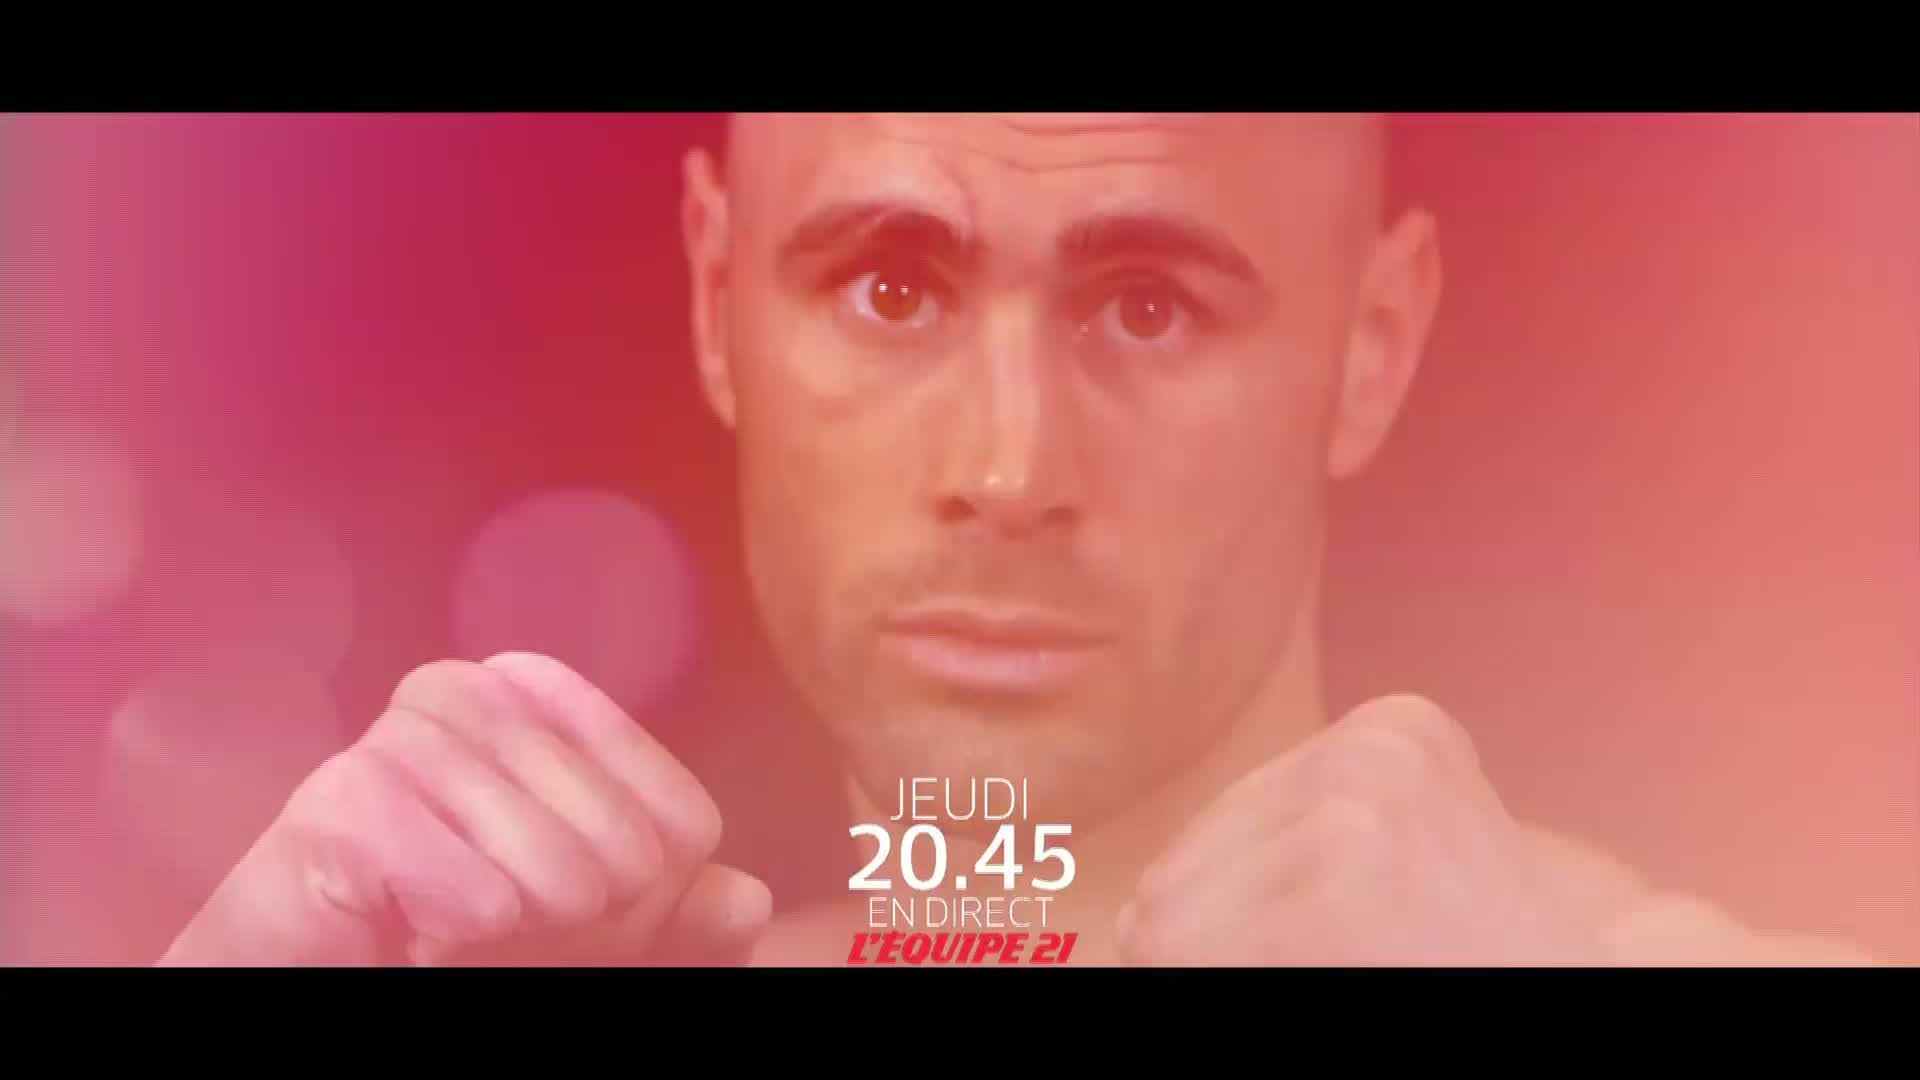 KICKBOXING - FIGHT NIGHT 2016 : BANDE-ANNONCE